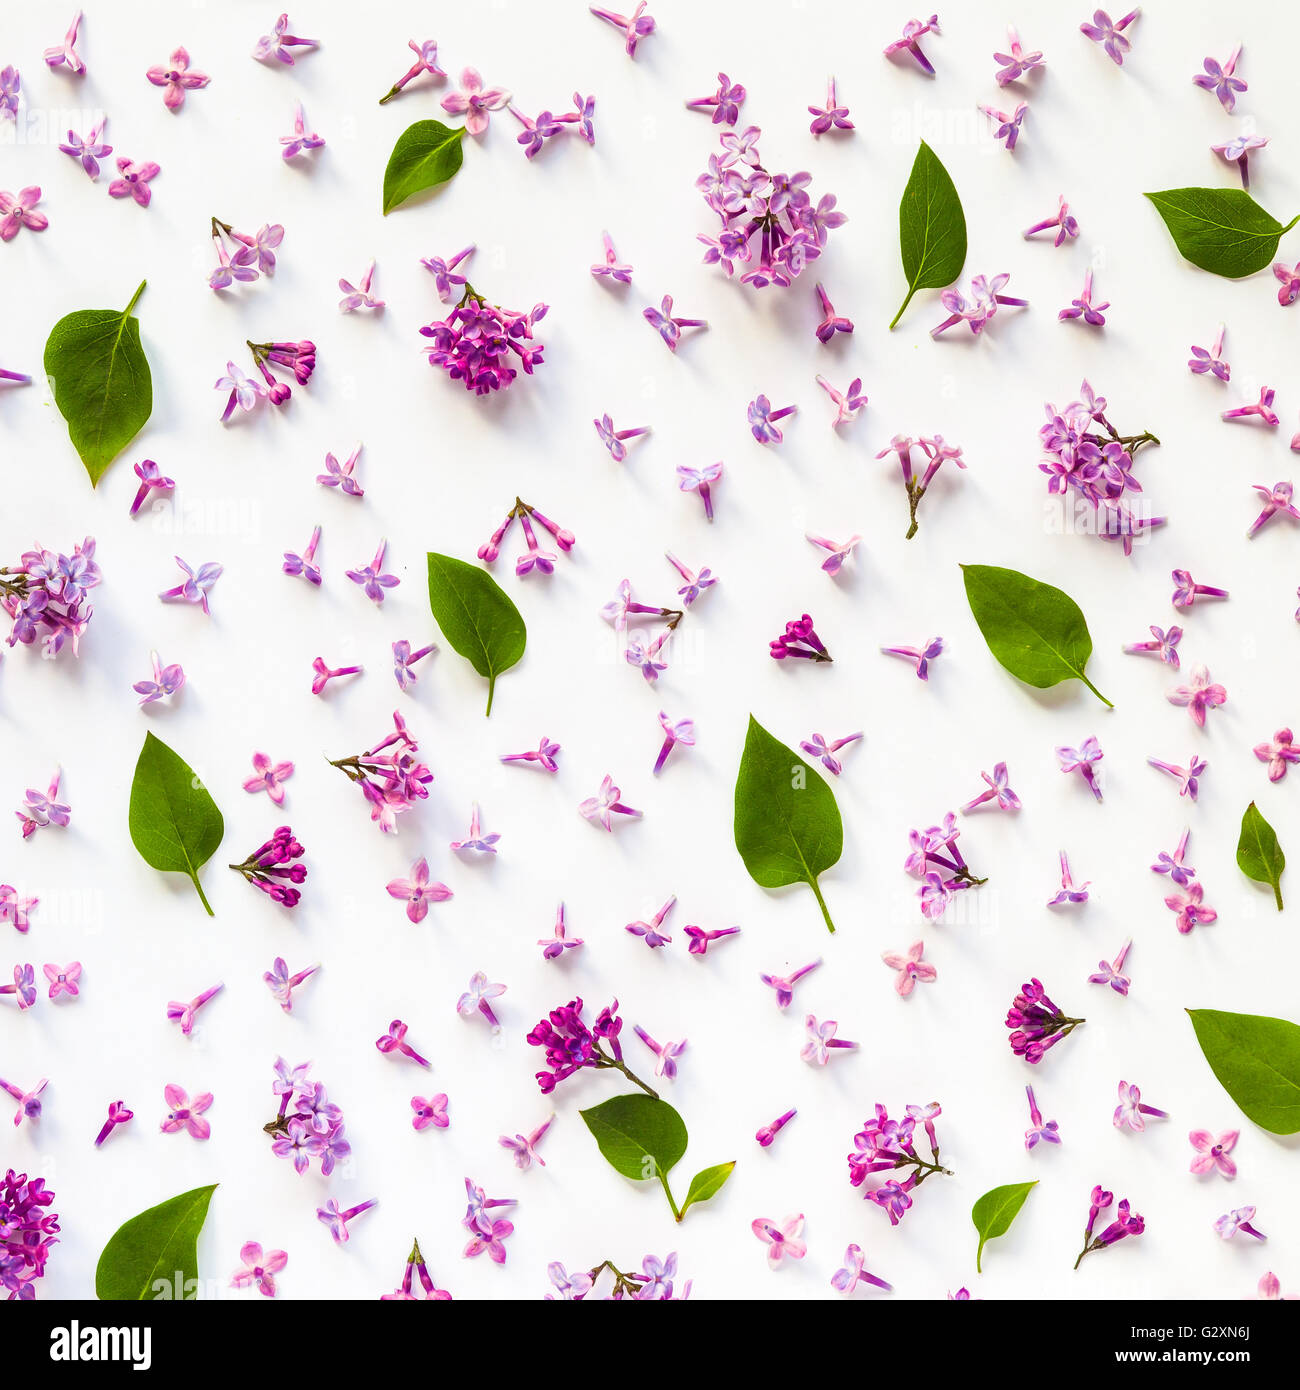 Floral pattern of fresh lilac flowers and leaves on white. Flat lay, top view. Stock Photo